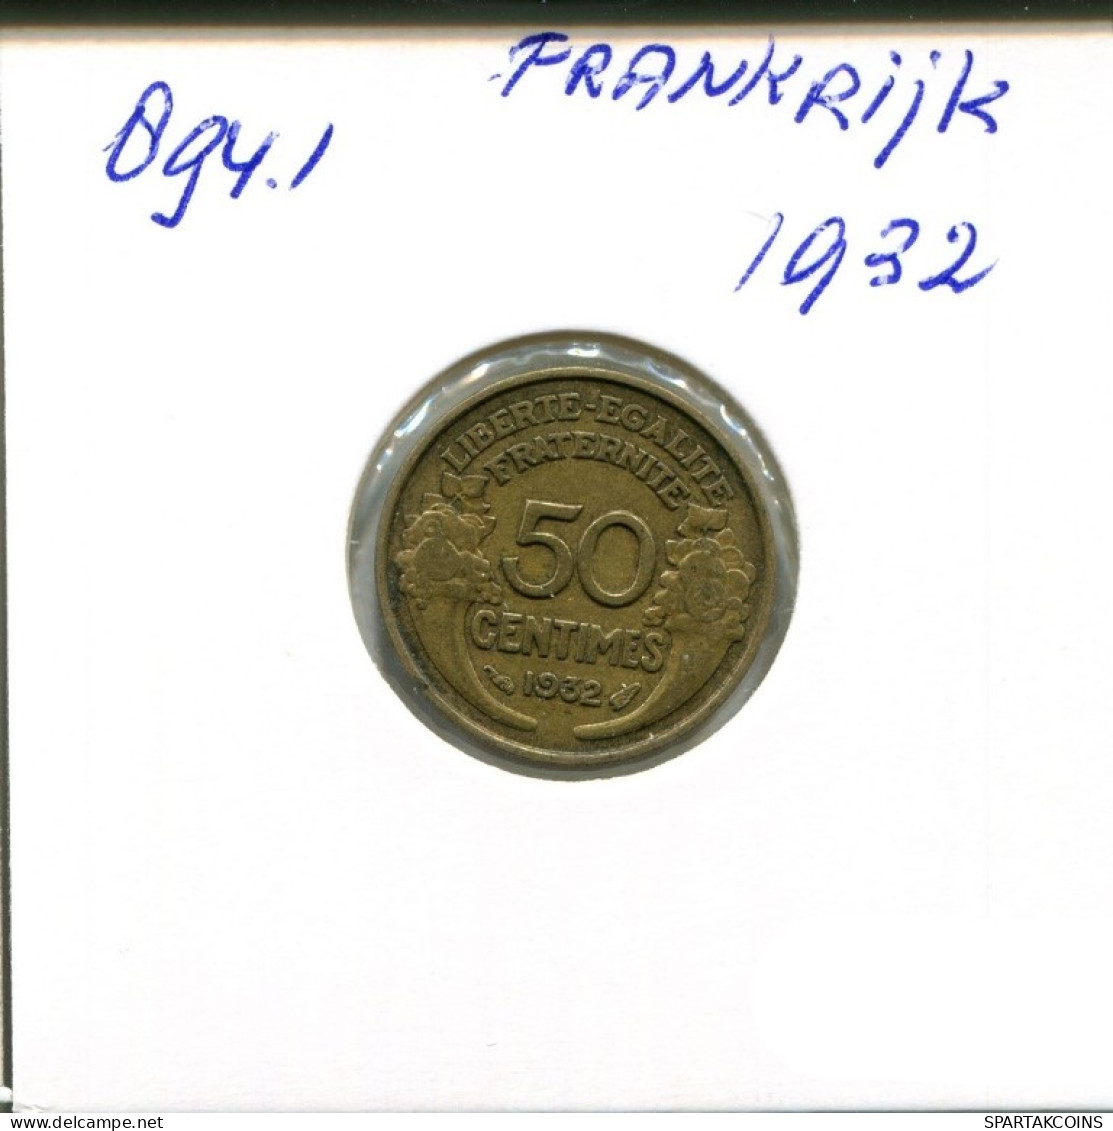 50 CENTIMES 1932 FRANCE French Coin #AN211.U.A - 50 Centimes